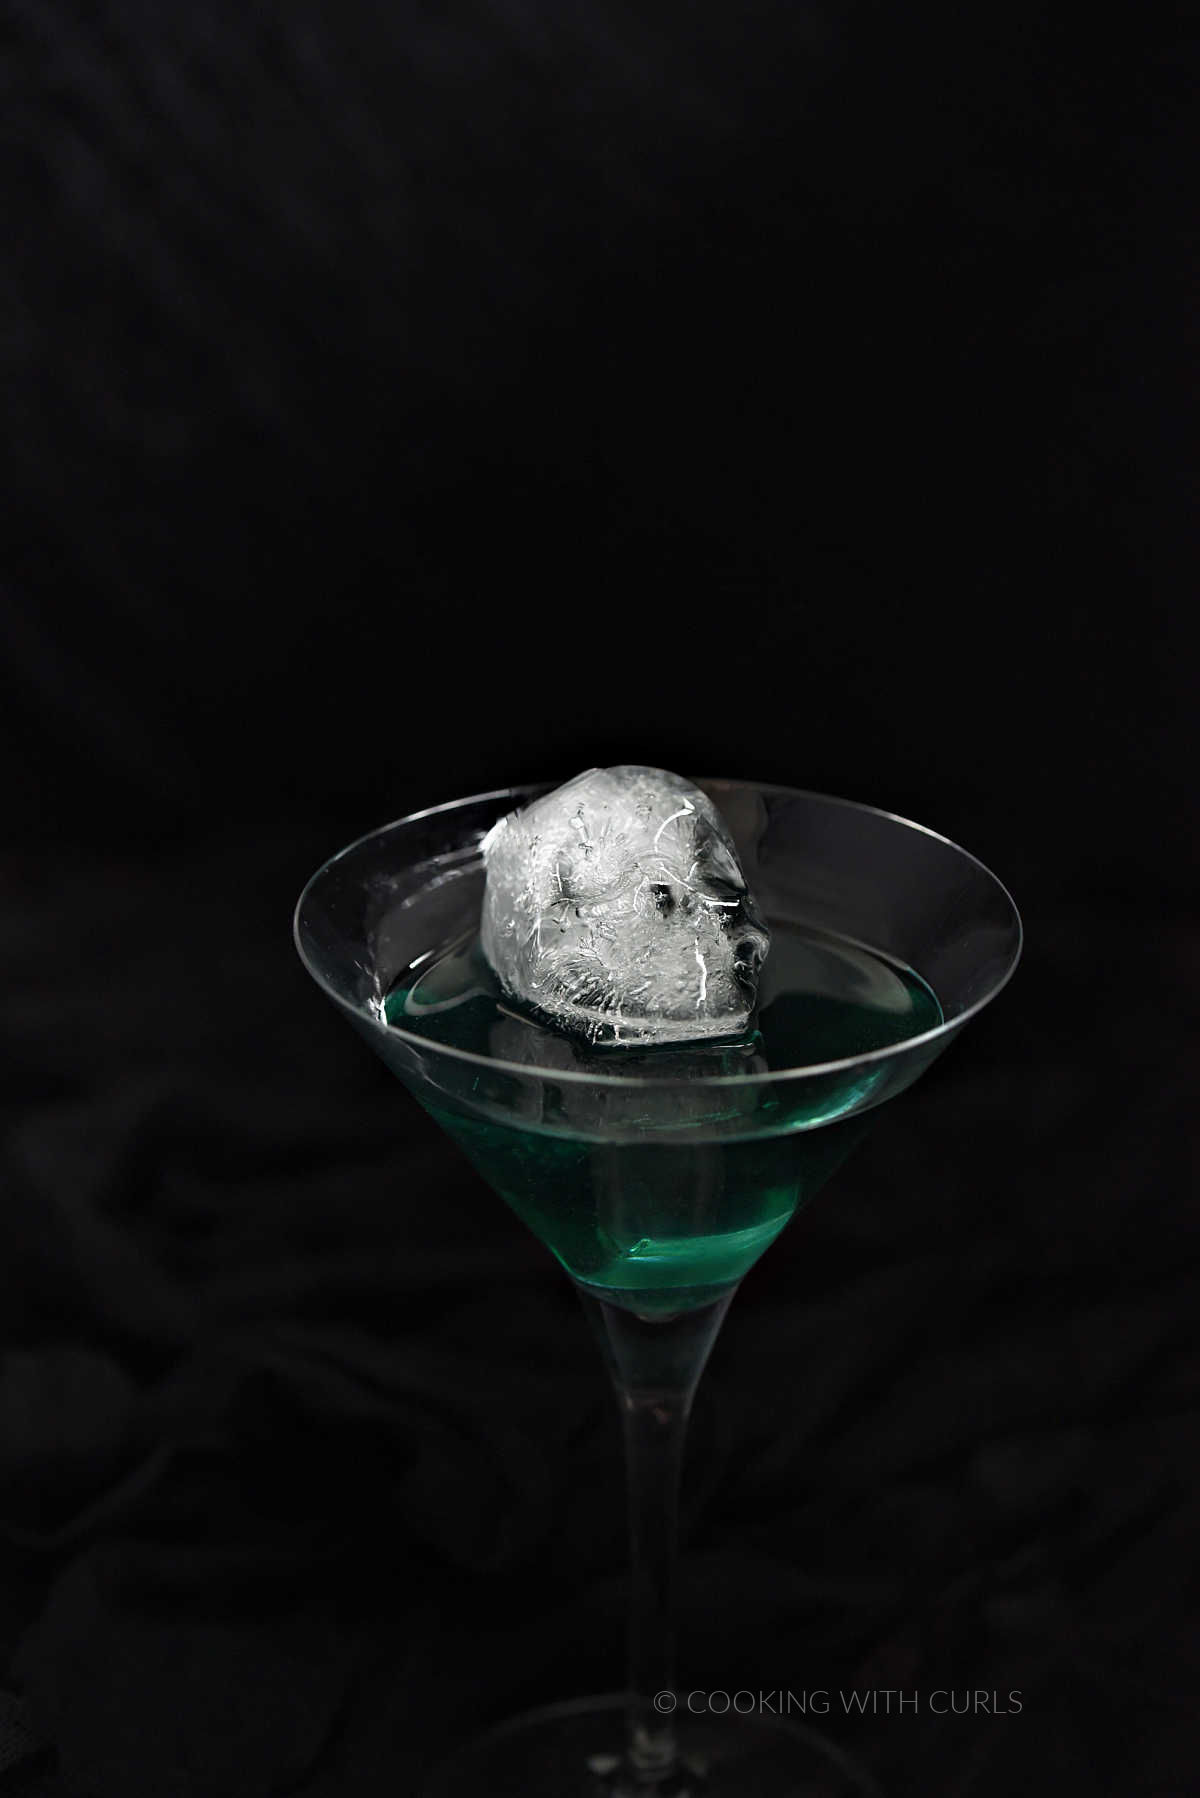 A skull shaped ice cube floating in emerald green liquid in a martini glass.